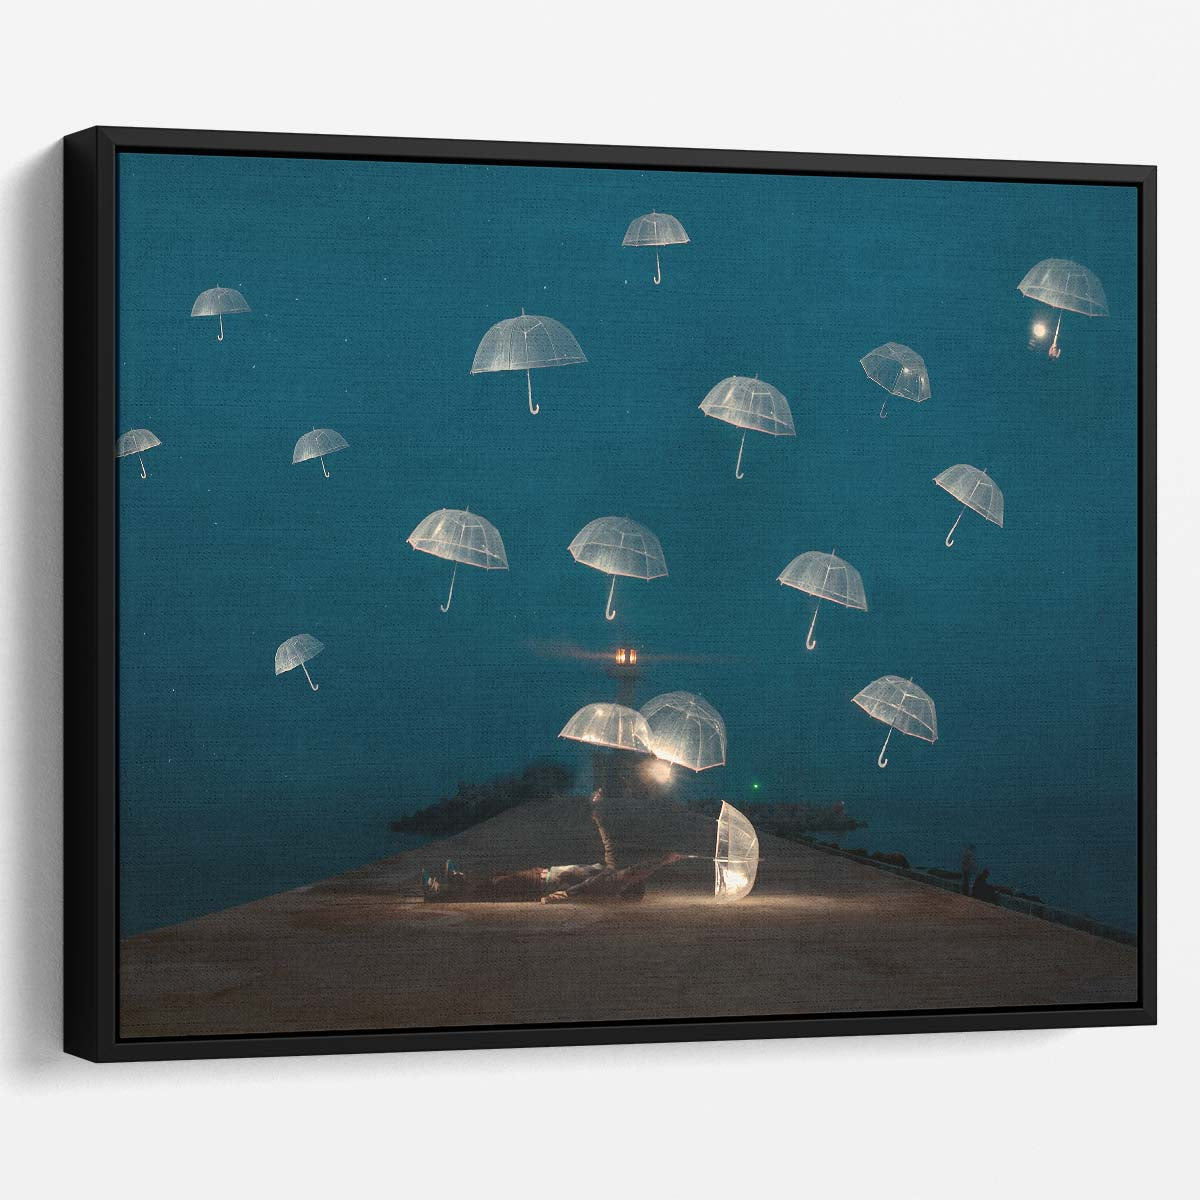 Surreal Floating Umbrellas Dreamy Night Landscape Wall Art by Luxuriance Designs. Made in USA.